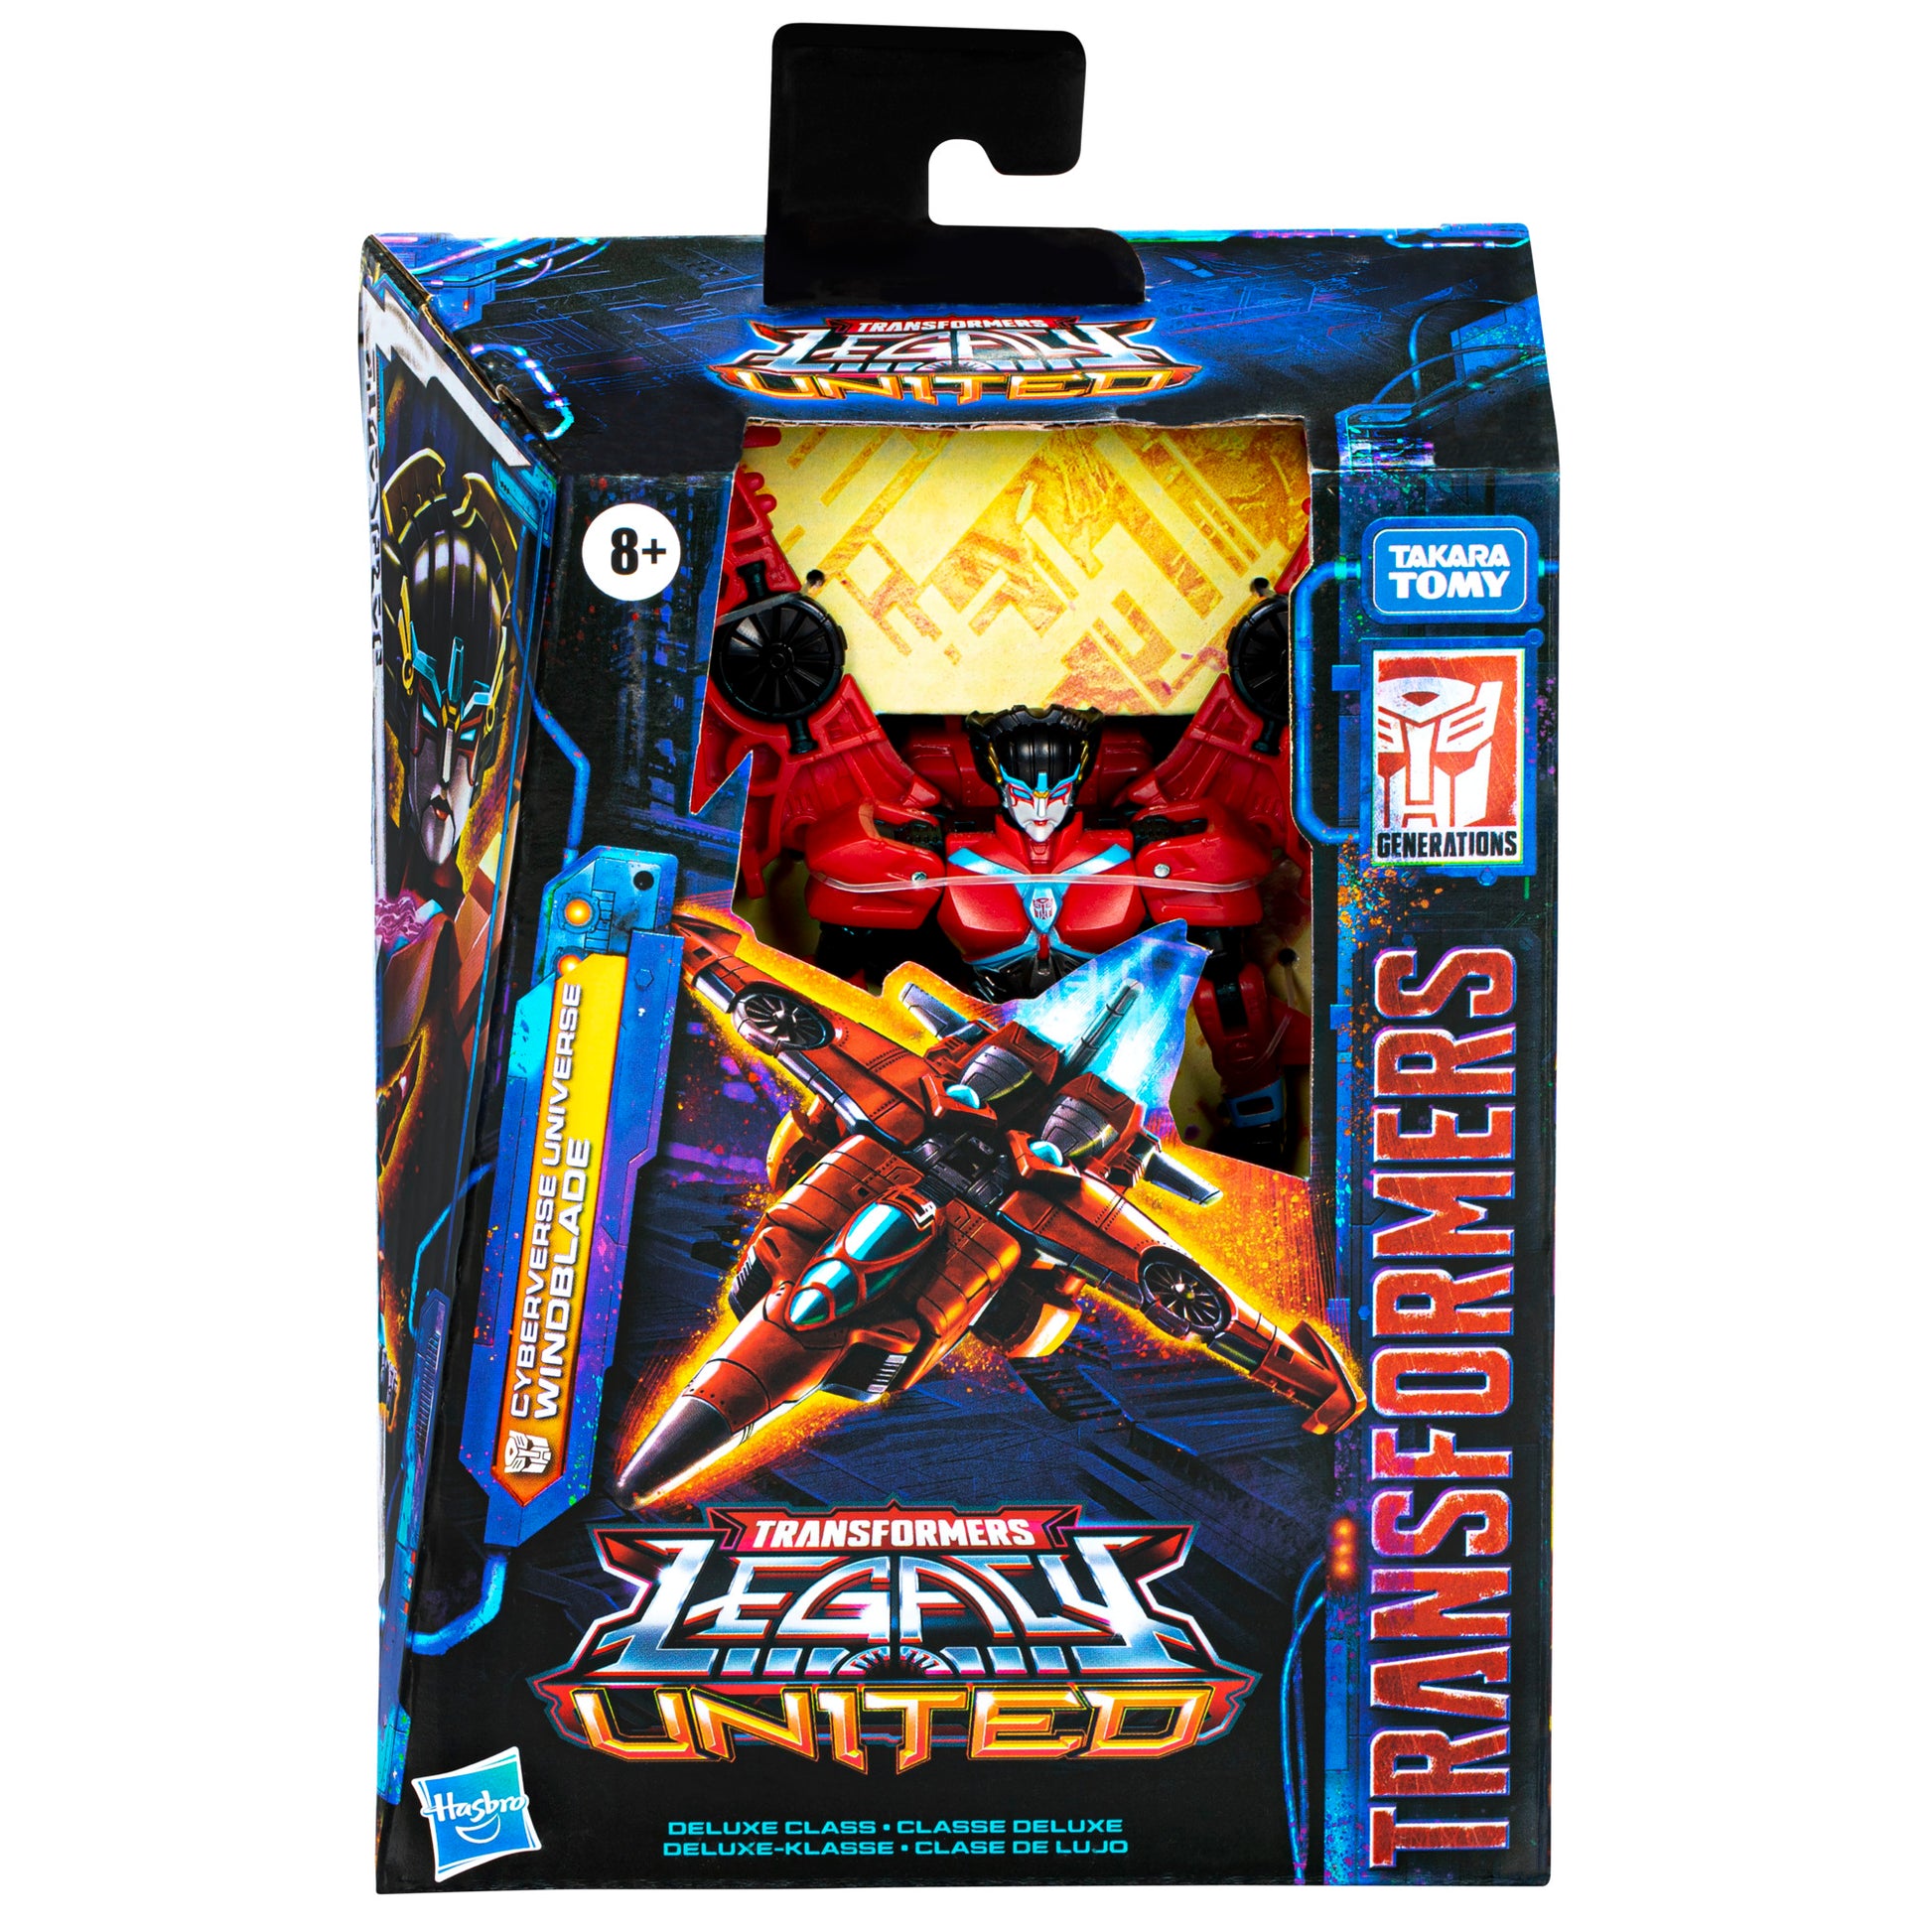 Transformers Legacy United Deluxe Cyberverse Universe Windblade 5.5” Action Figure, 8+ HERETOSRVEYOU 3